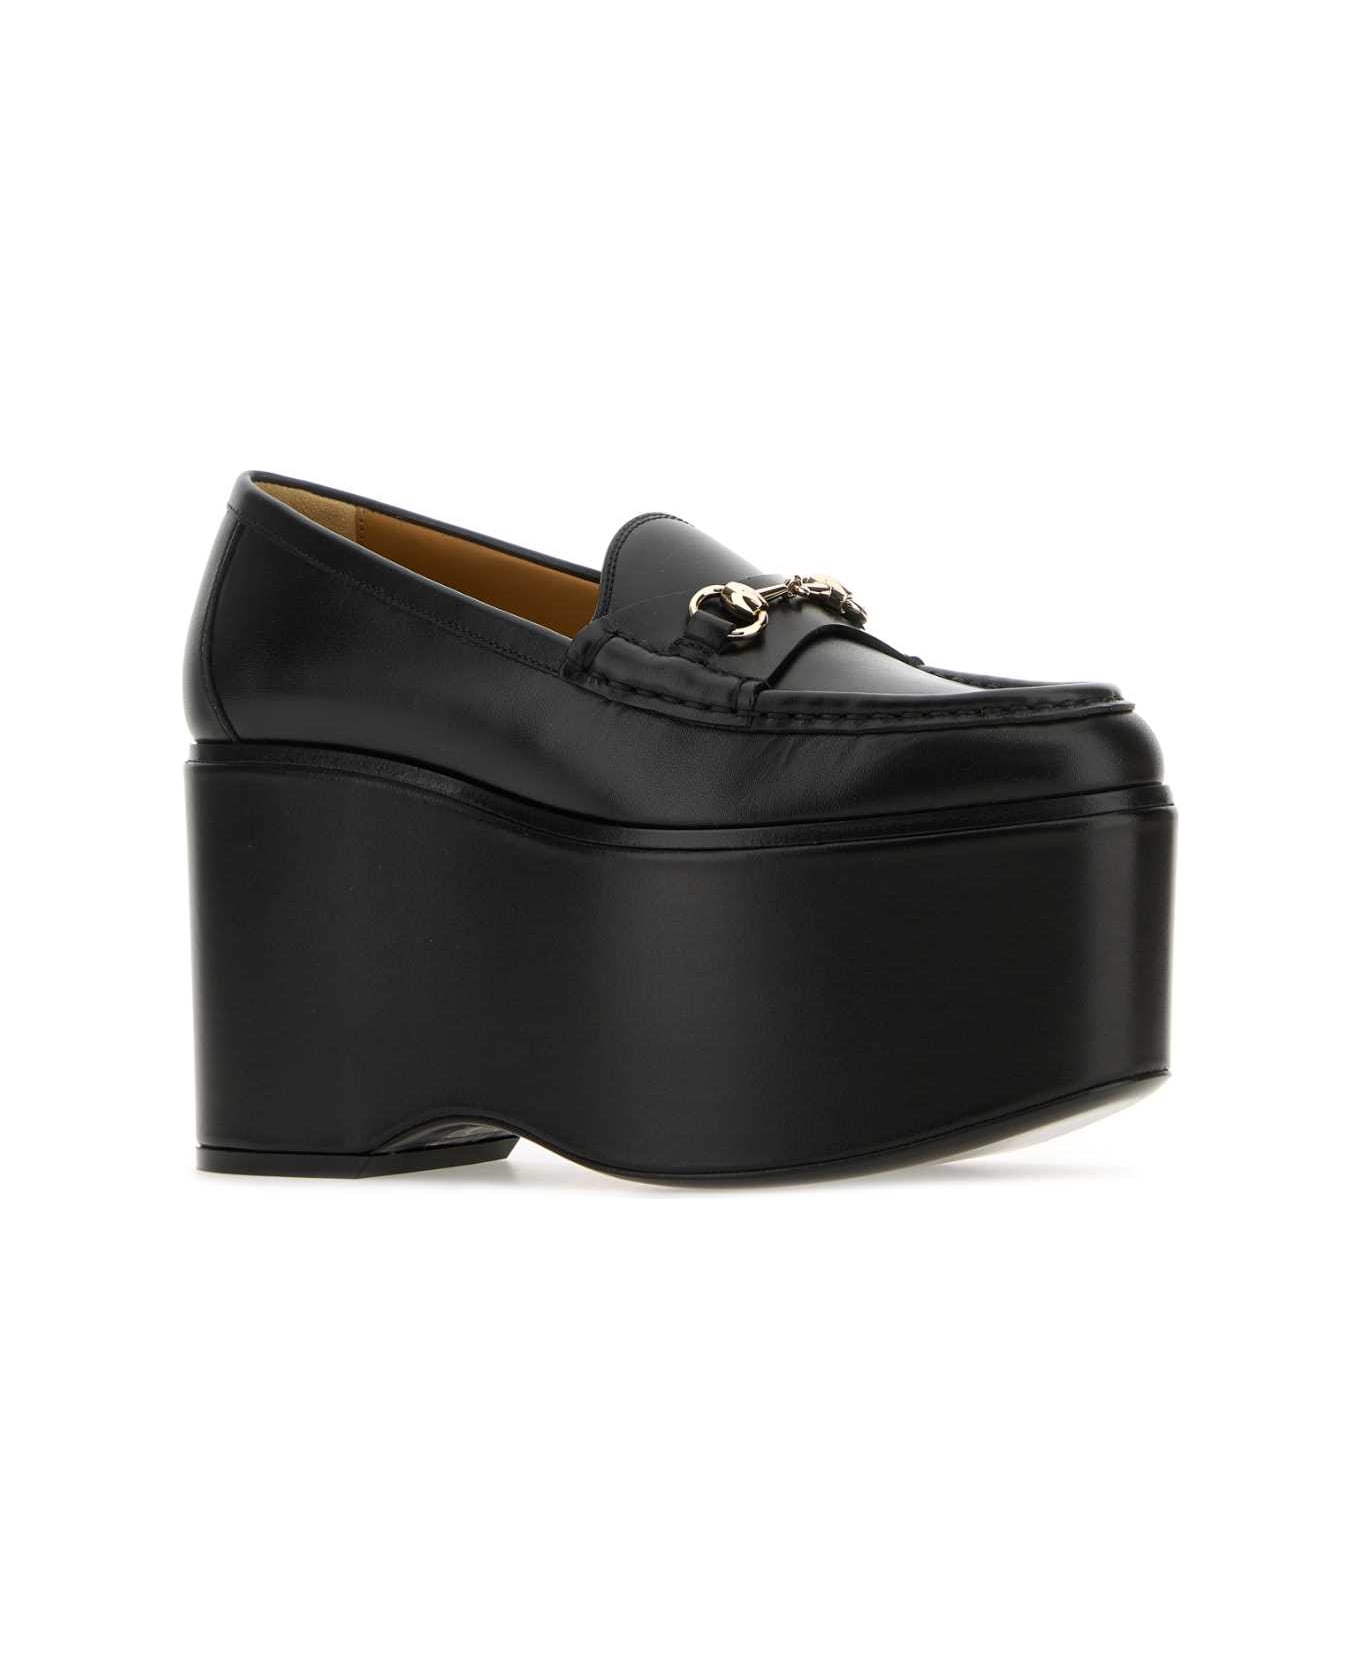 Gucci Black Leather Loafers - Black